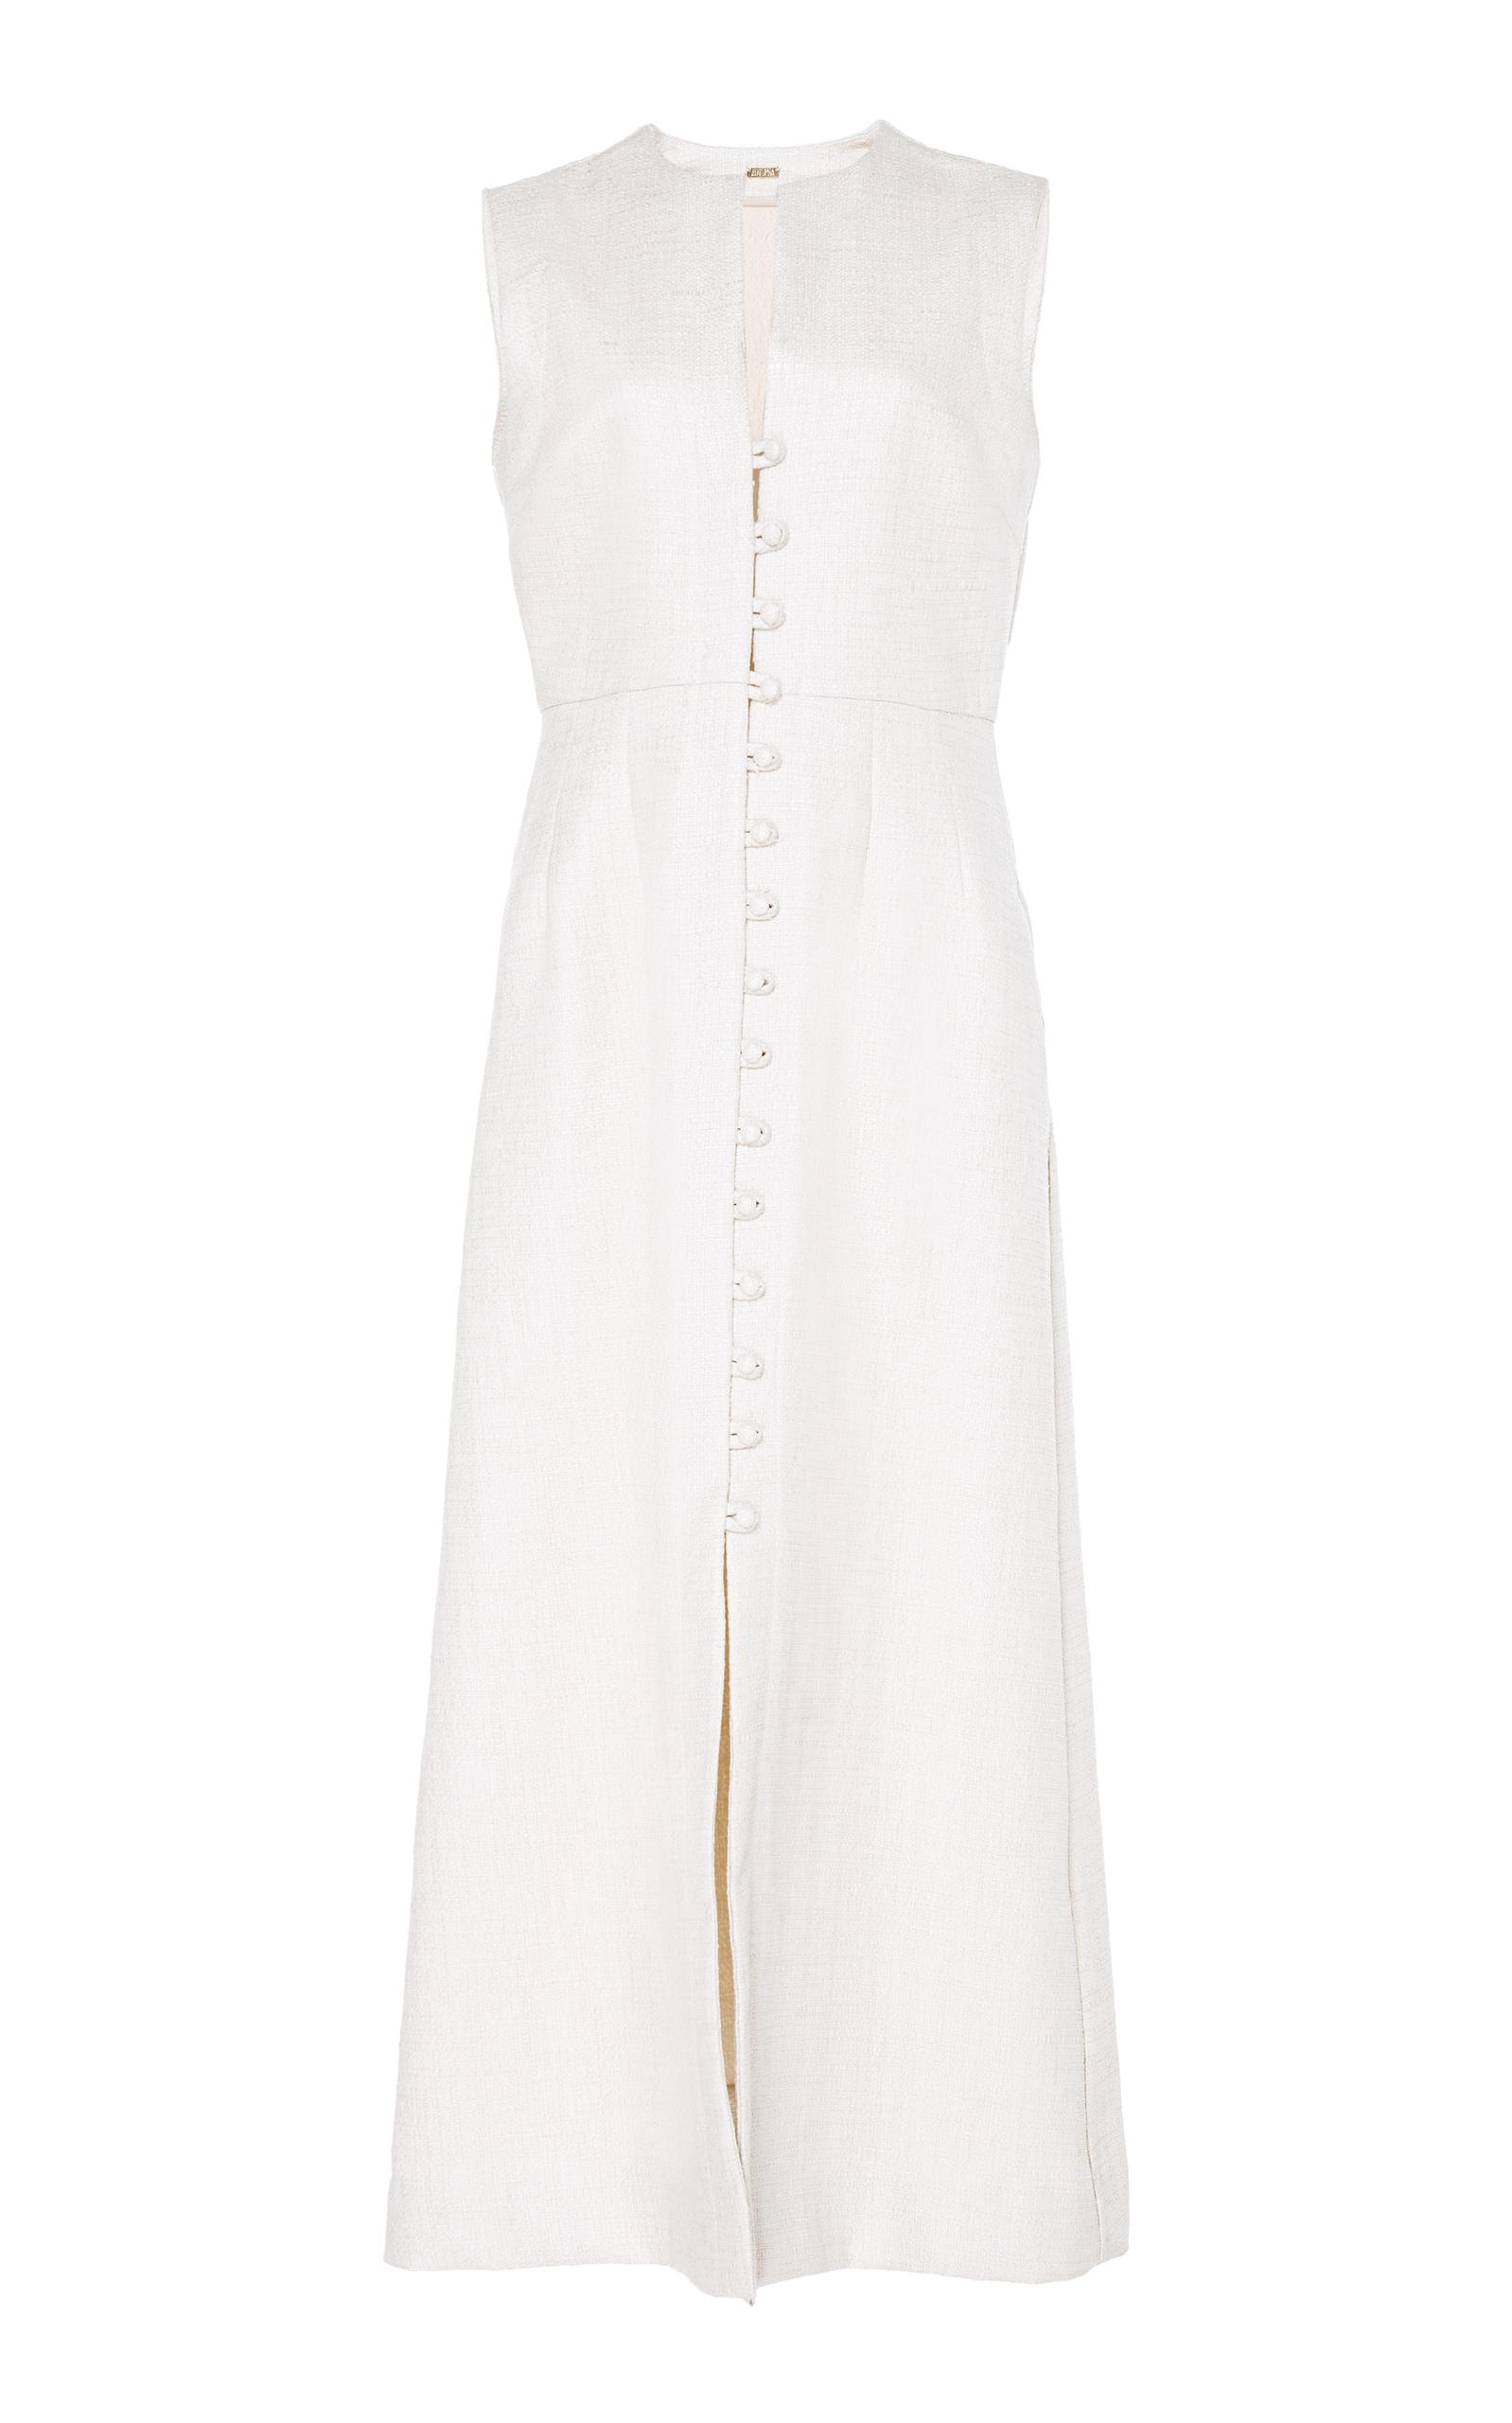 Lyst - Cult Gaia Natural Gia House Dress in White